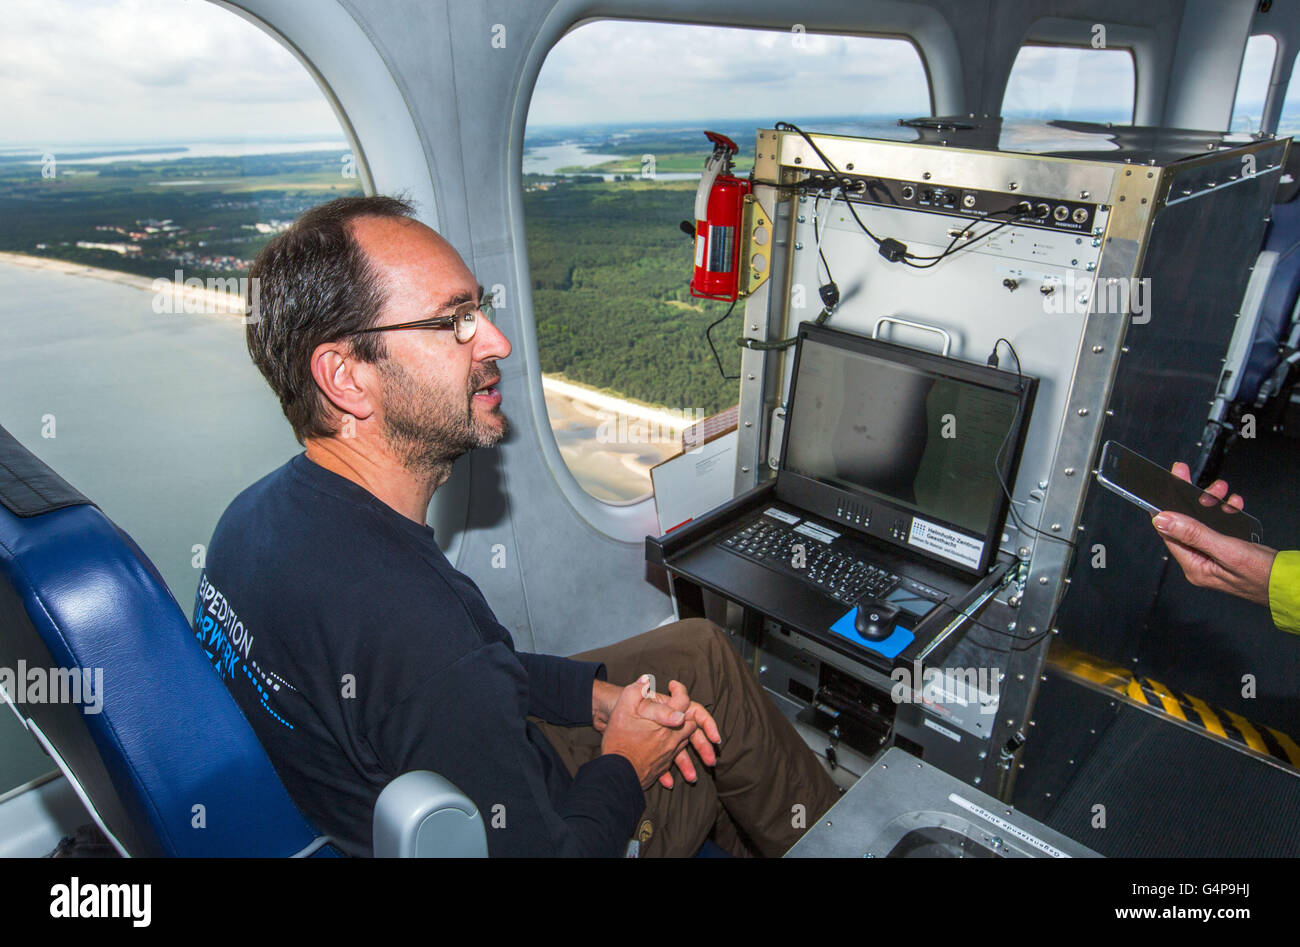 Geesthacht, Germany. 19th June, 2016. In the control centre of a zeppelin the biological oceanographer Ruediger Roettgers works during a measurement flight over the Baltic Sea from the Peenemuende airfield in Peenemuende, Germany, 19 June 2016. The incoming measurements belong to an expedition for the research of marine vortices. The 75-meter-long airship is equipped with special high-resolution cameras, with which the smallest temperature differences of 0.03 degrees and colour differences can be registered in the water. The researchers collect data on the influence of unstable small sea swirl Stock Photo